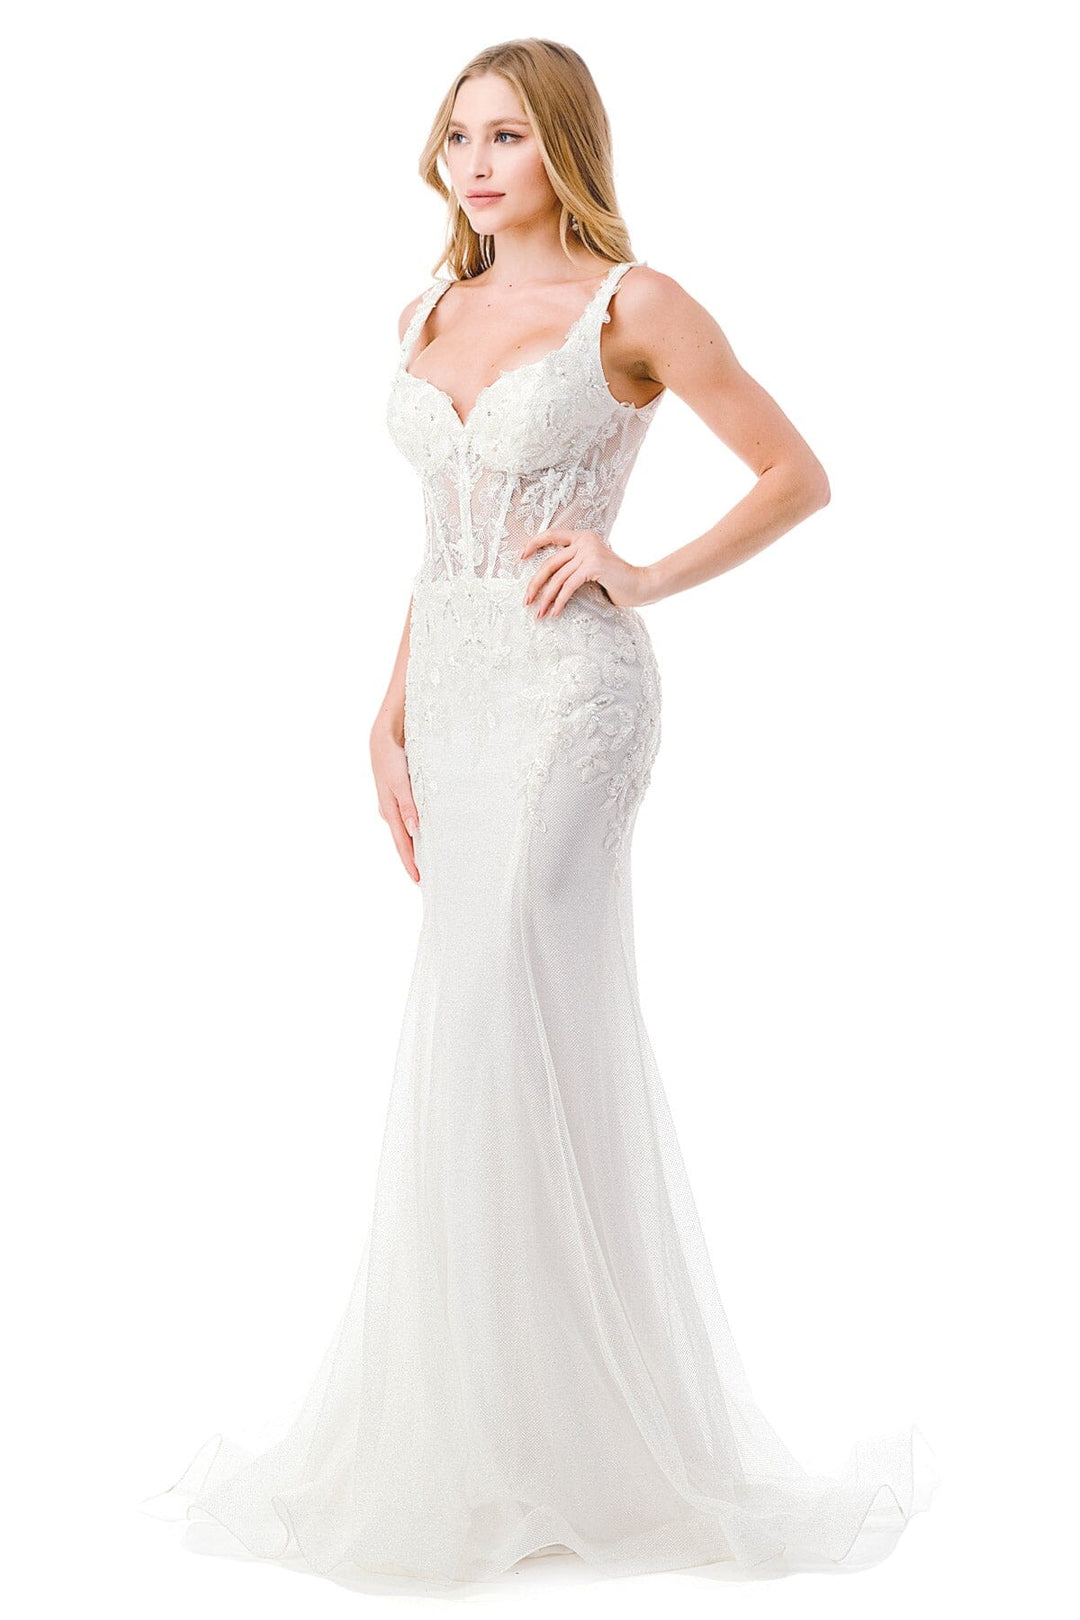 Fitted Applique Sheer Corset Wedding Gown by Coya MS0025